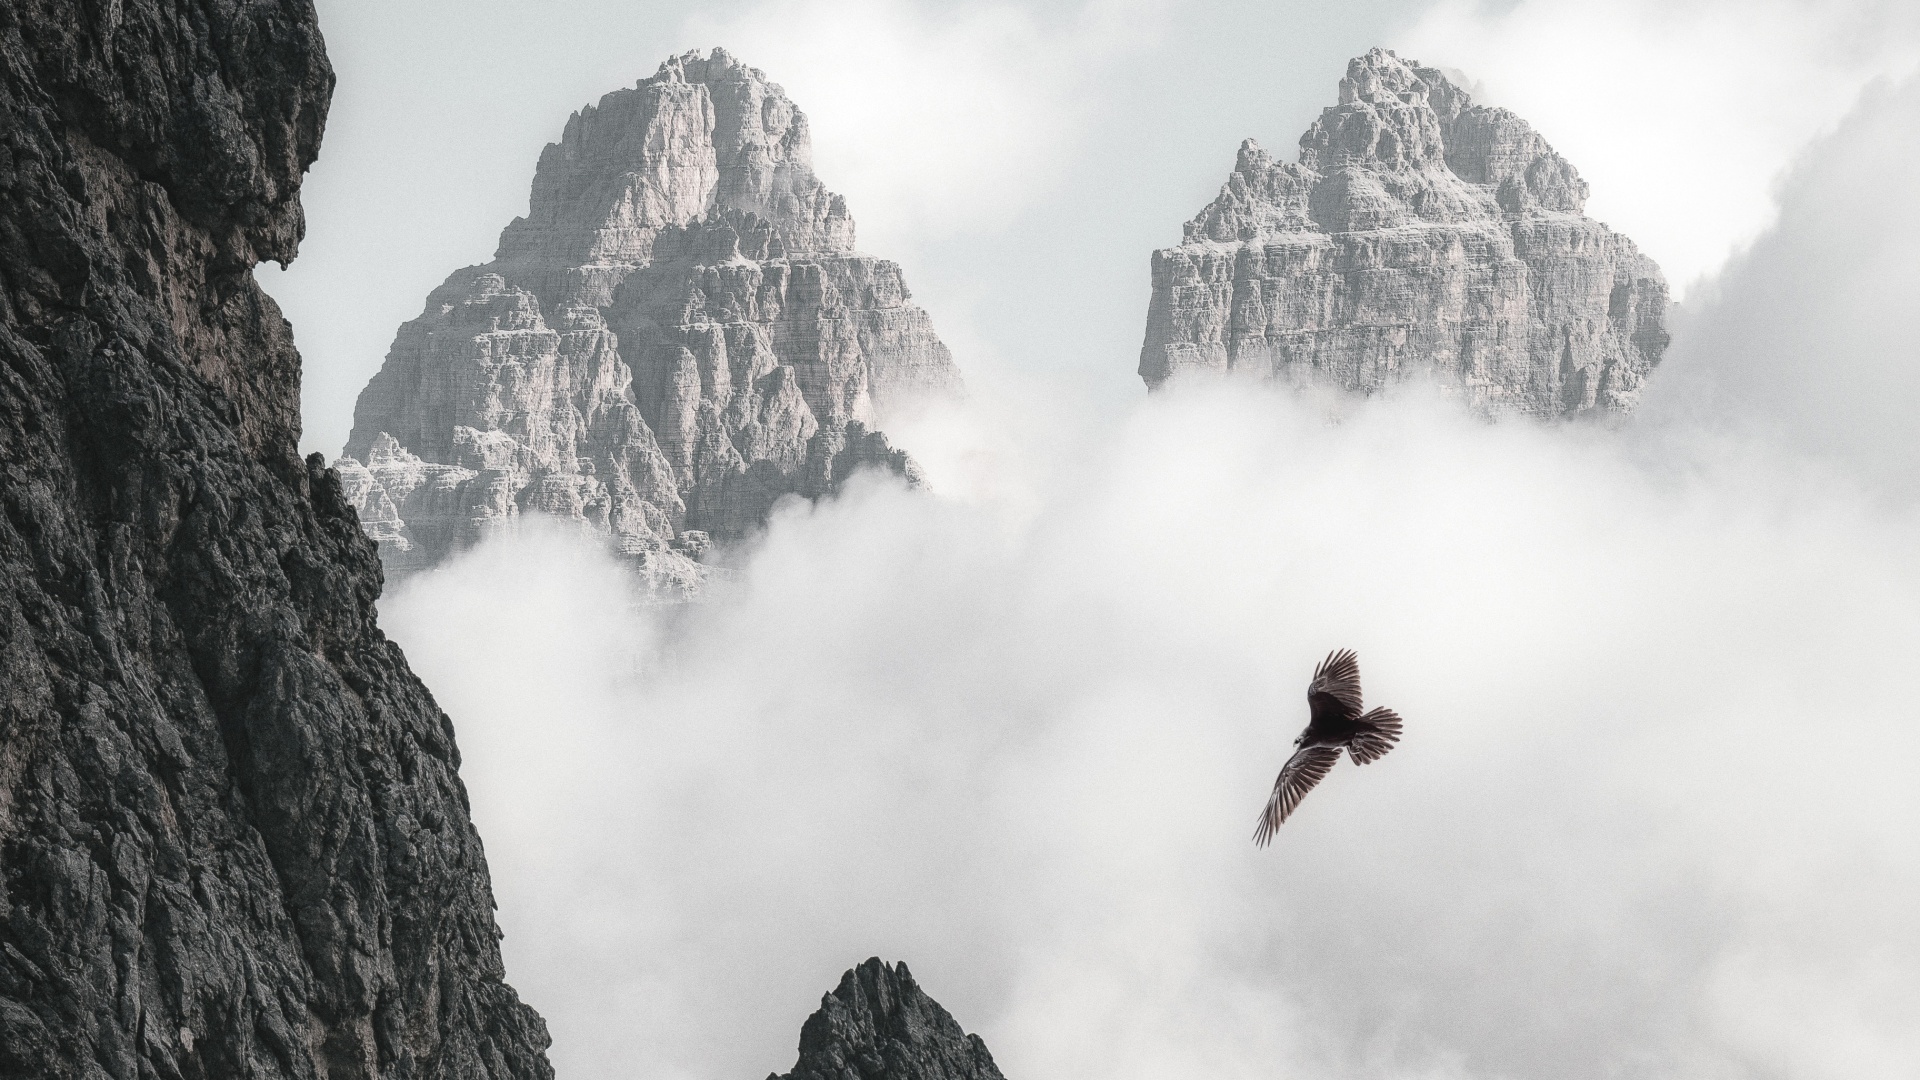 Bald Eagle Flying Through Clouds And Mountains 4k (click to view) HD Wallpapers in 1920x1080 Resolution